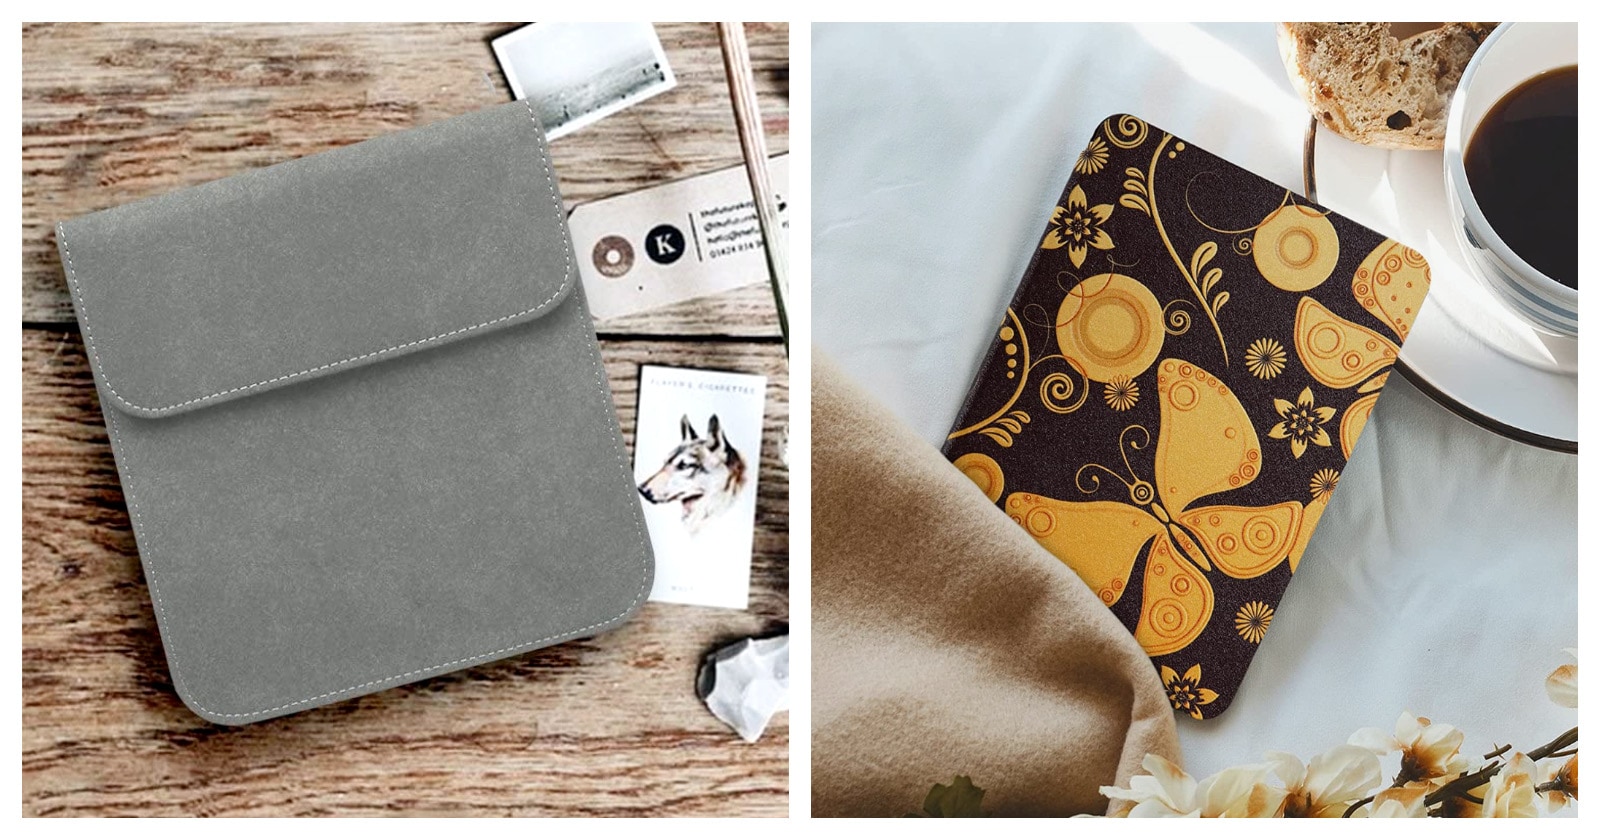 Kindle case or sleeve? These tips will help you decide